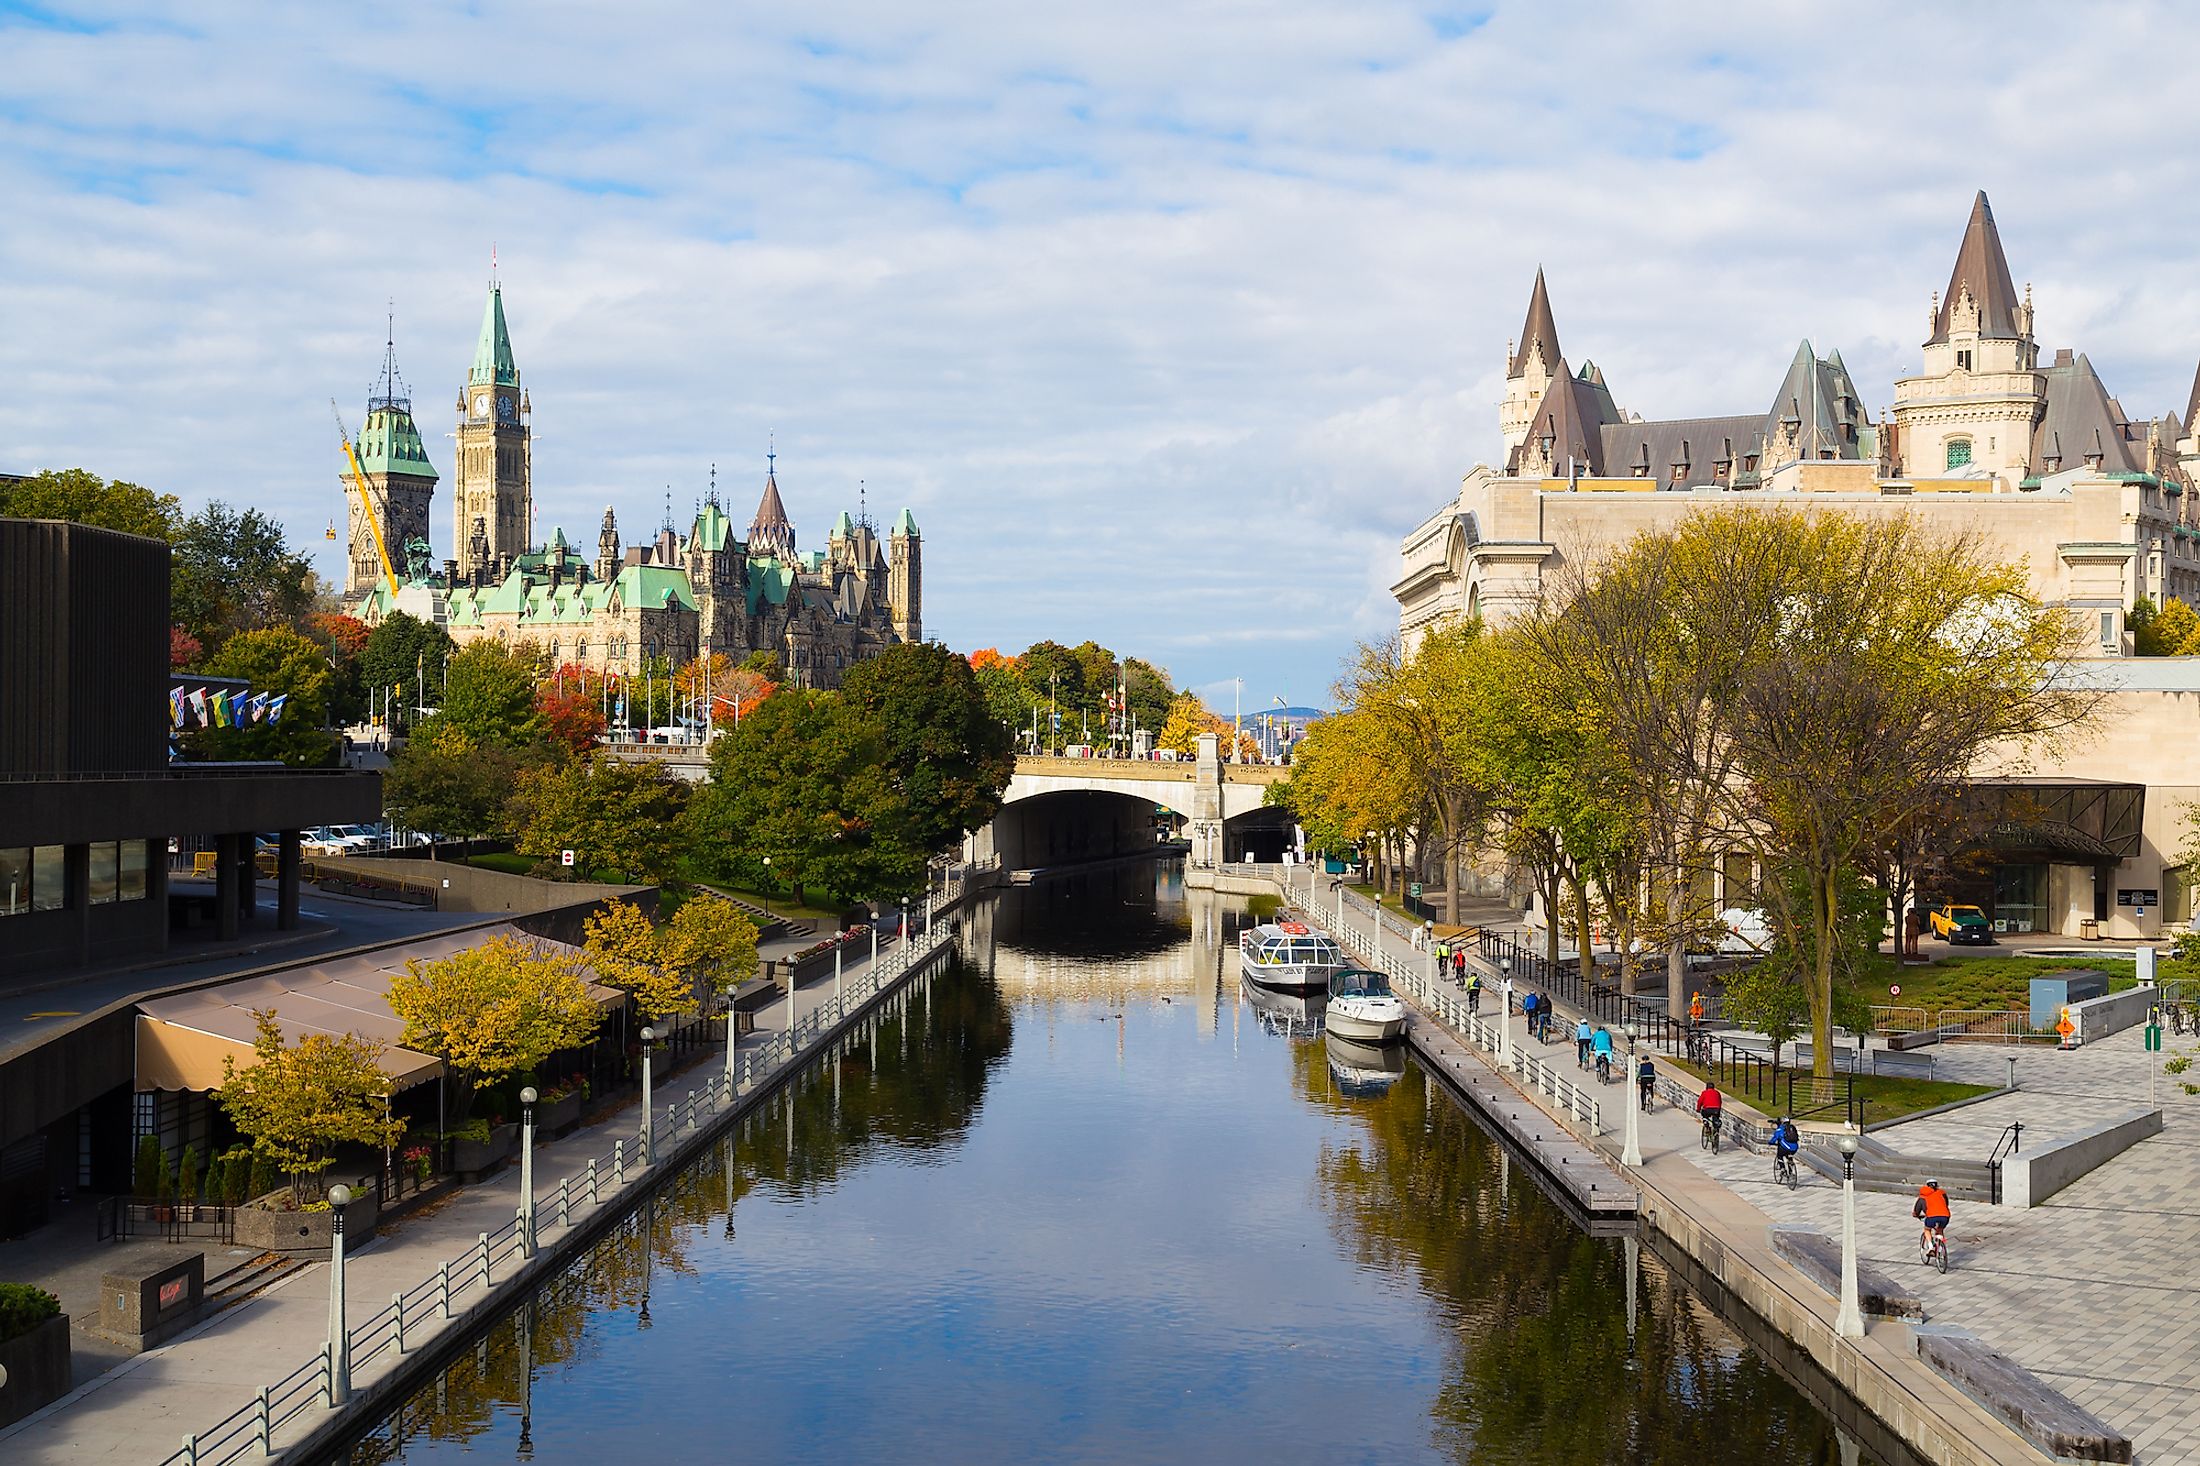 A view up the Rideau Canal towards the Ottawa Parliament. Editorial credit: mikecphoto / Shutterstock.com